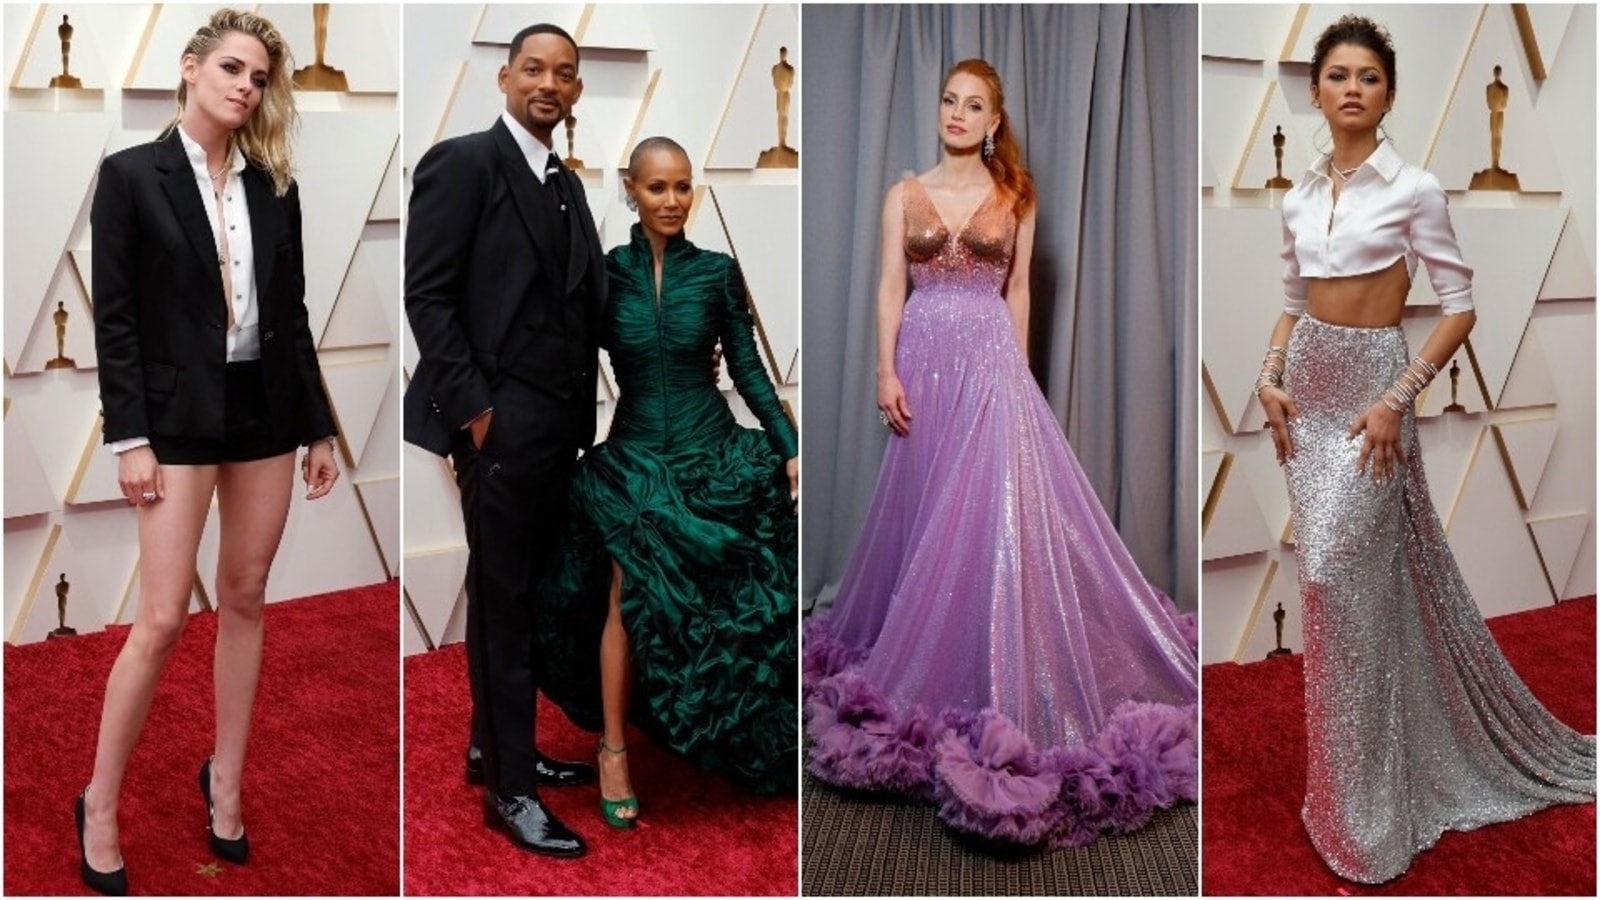 Oscars 2022: Will Smith and Jessica Chastain to Kristen Stewart and Zendaya, who wore what at 94th Academy Awards